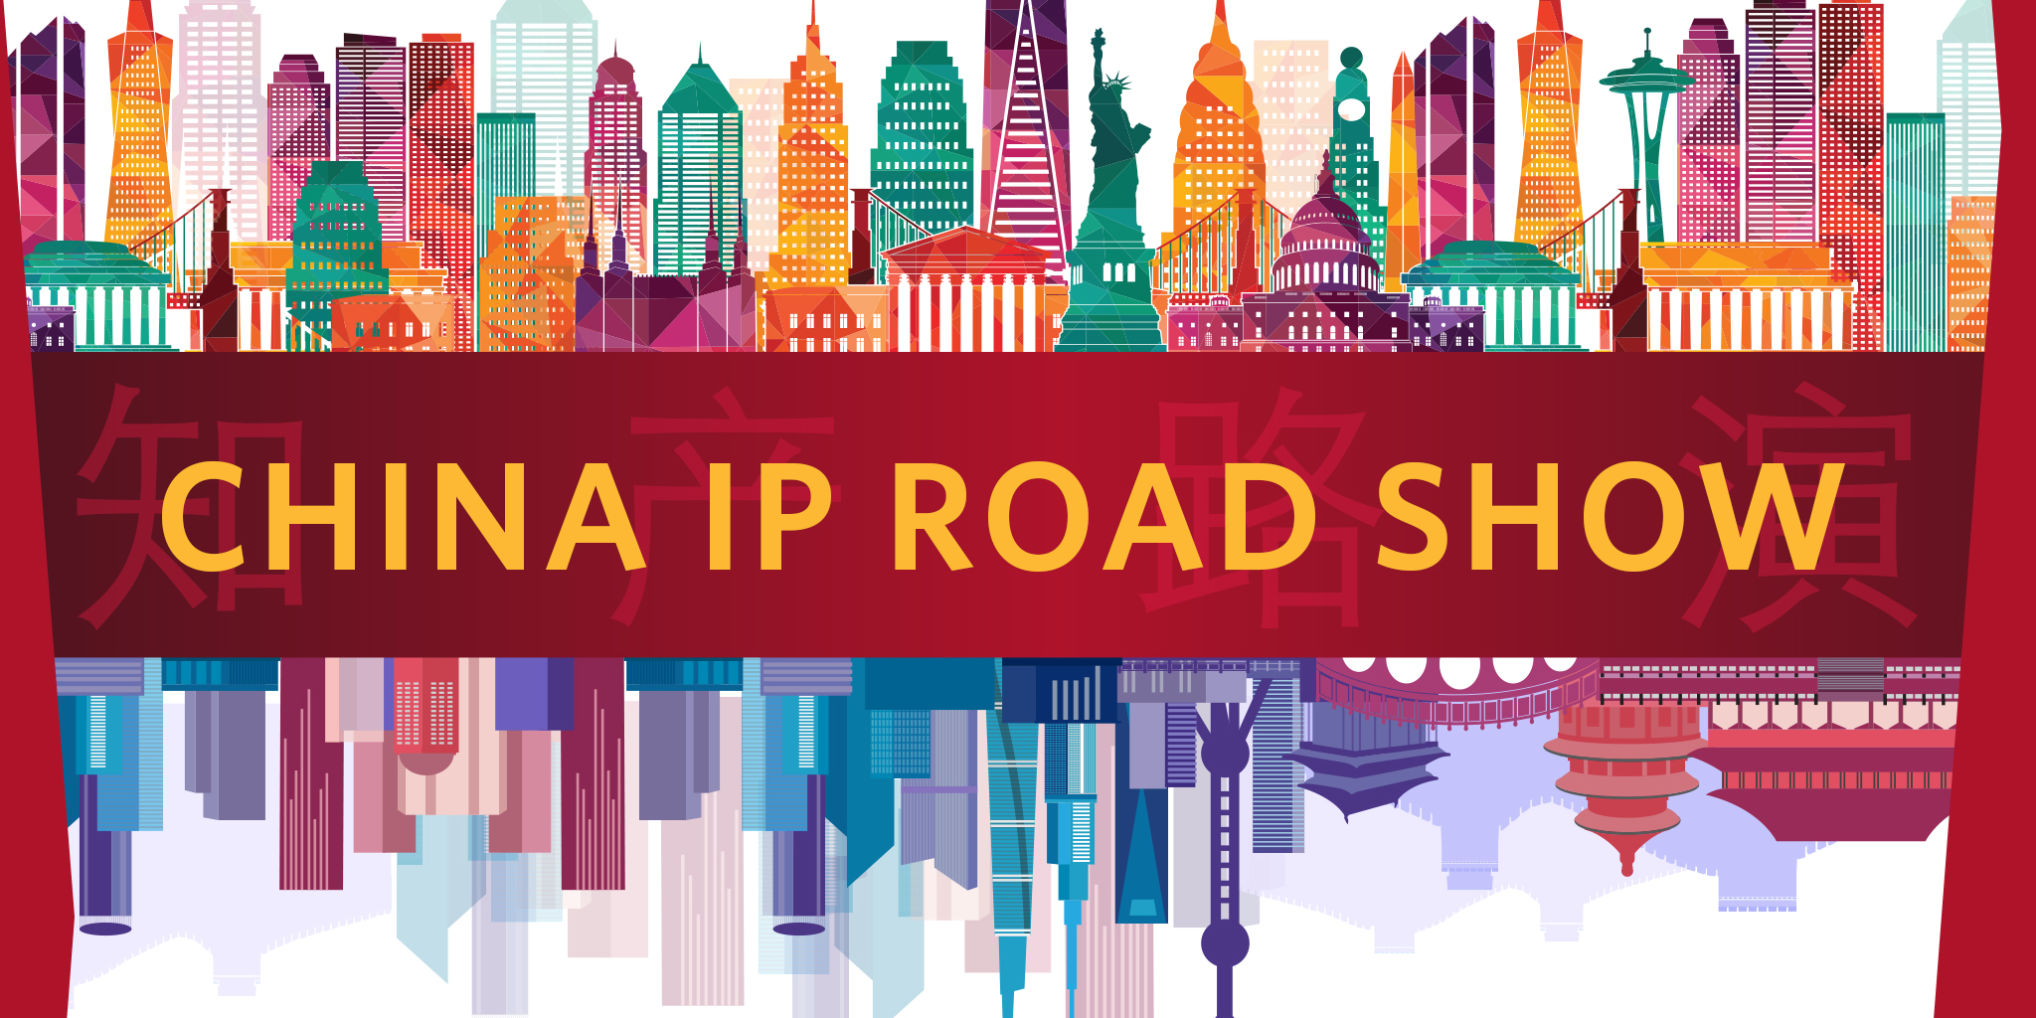 Strategies for IP Protection in China: What U.S. Businesses Need to Know